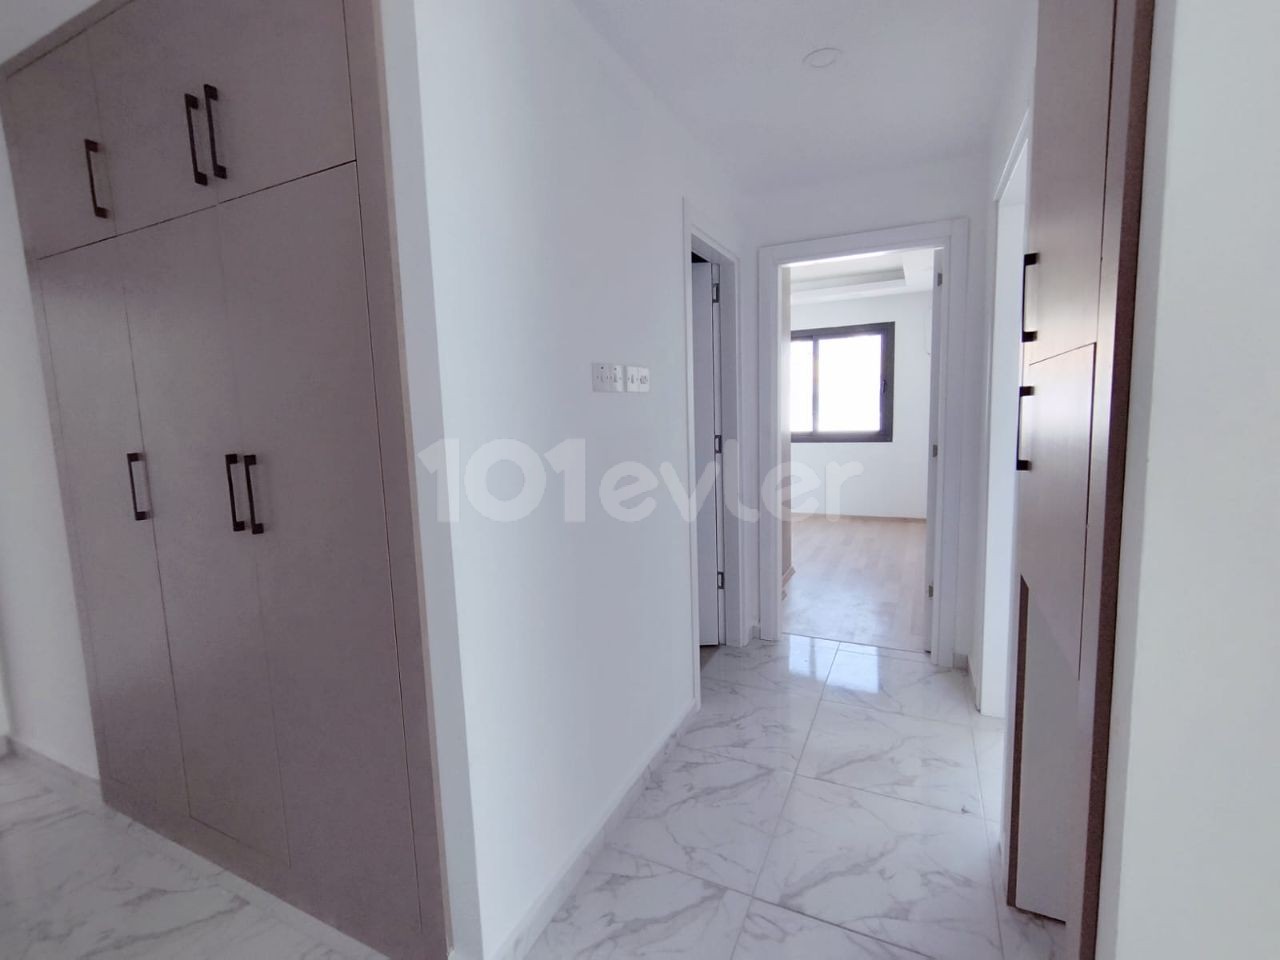 2+1 Apartment for Sale in Alsancak / 600 gbp Rental Income